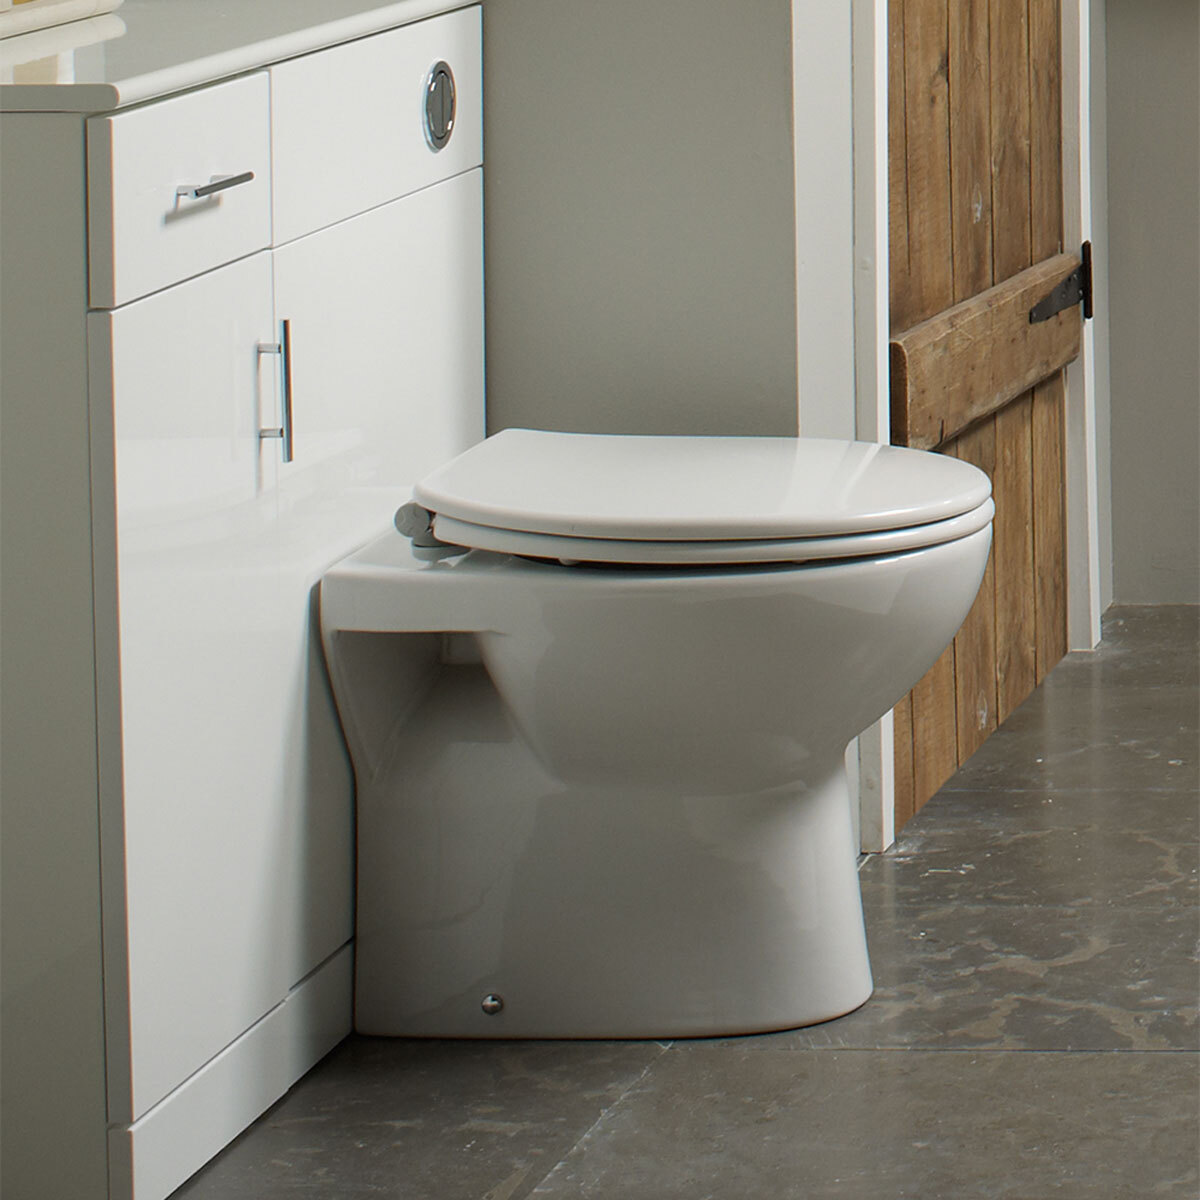 Lifestyle image of toilet seat on bowl unit in bathroom setting